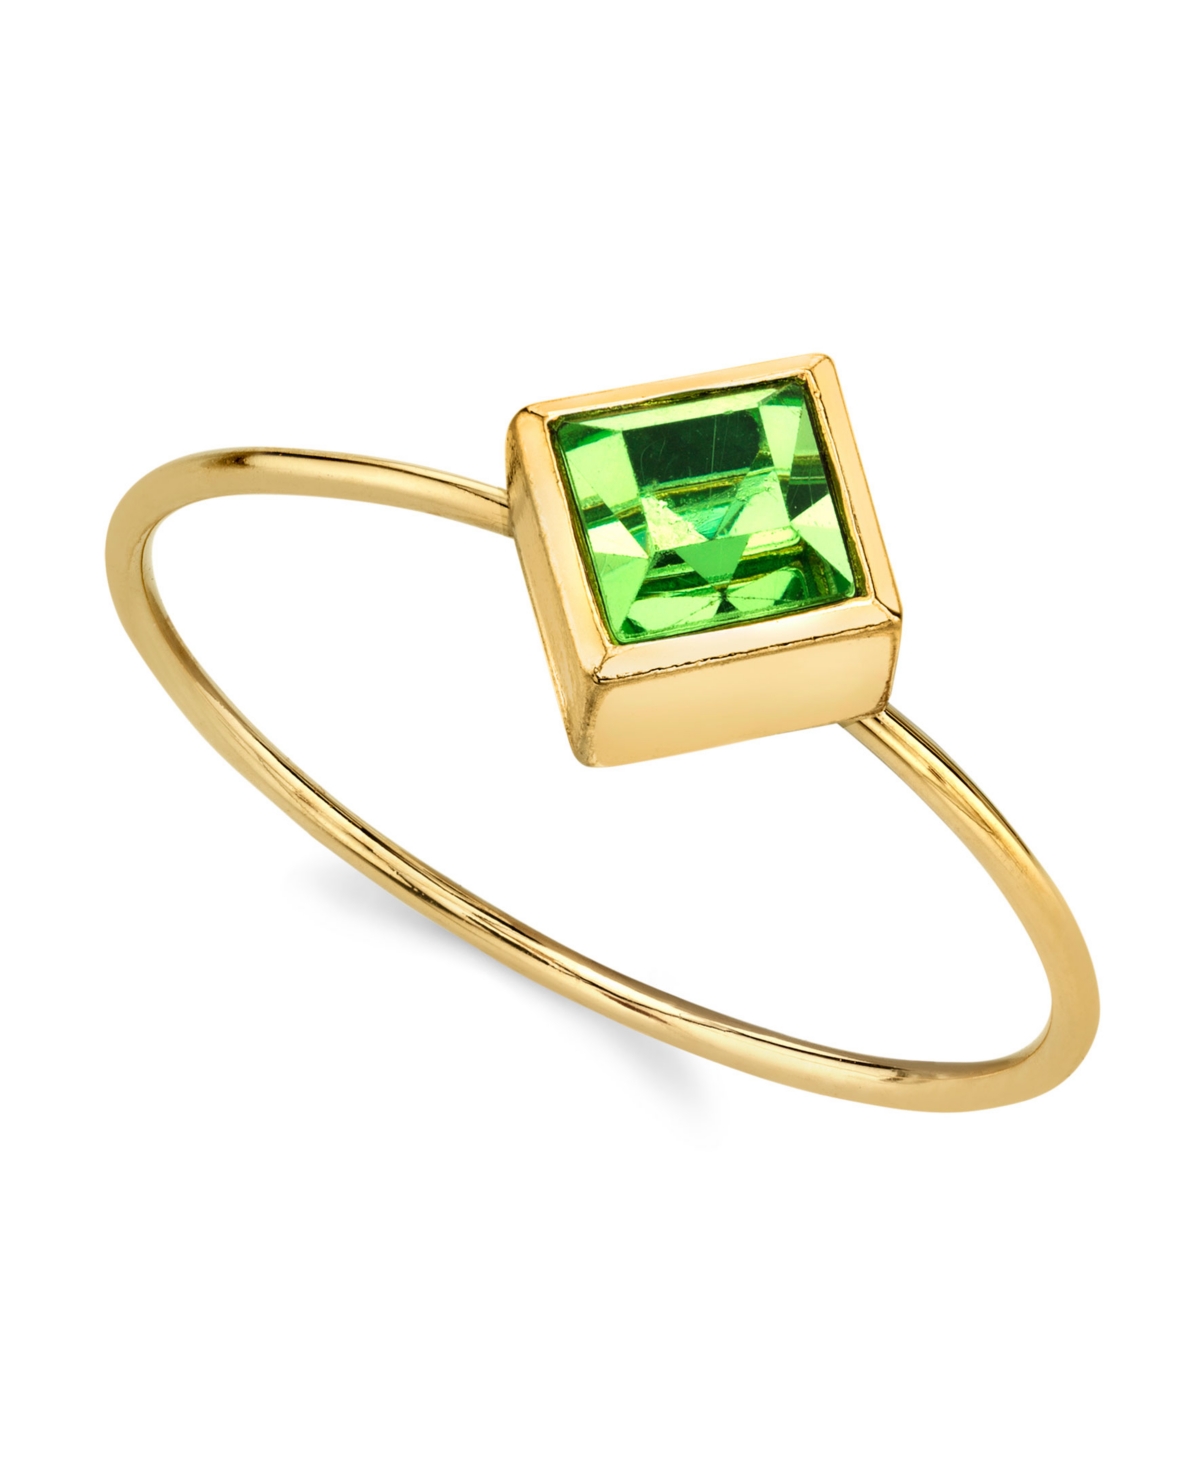 2028 14k Gold Dipped Diamond Shaped Crystal Ring In Green